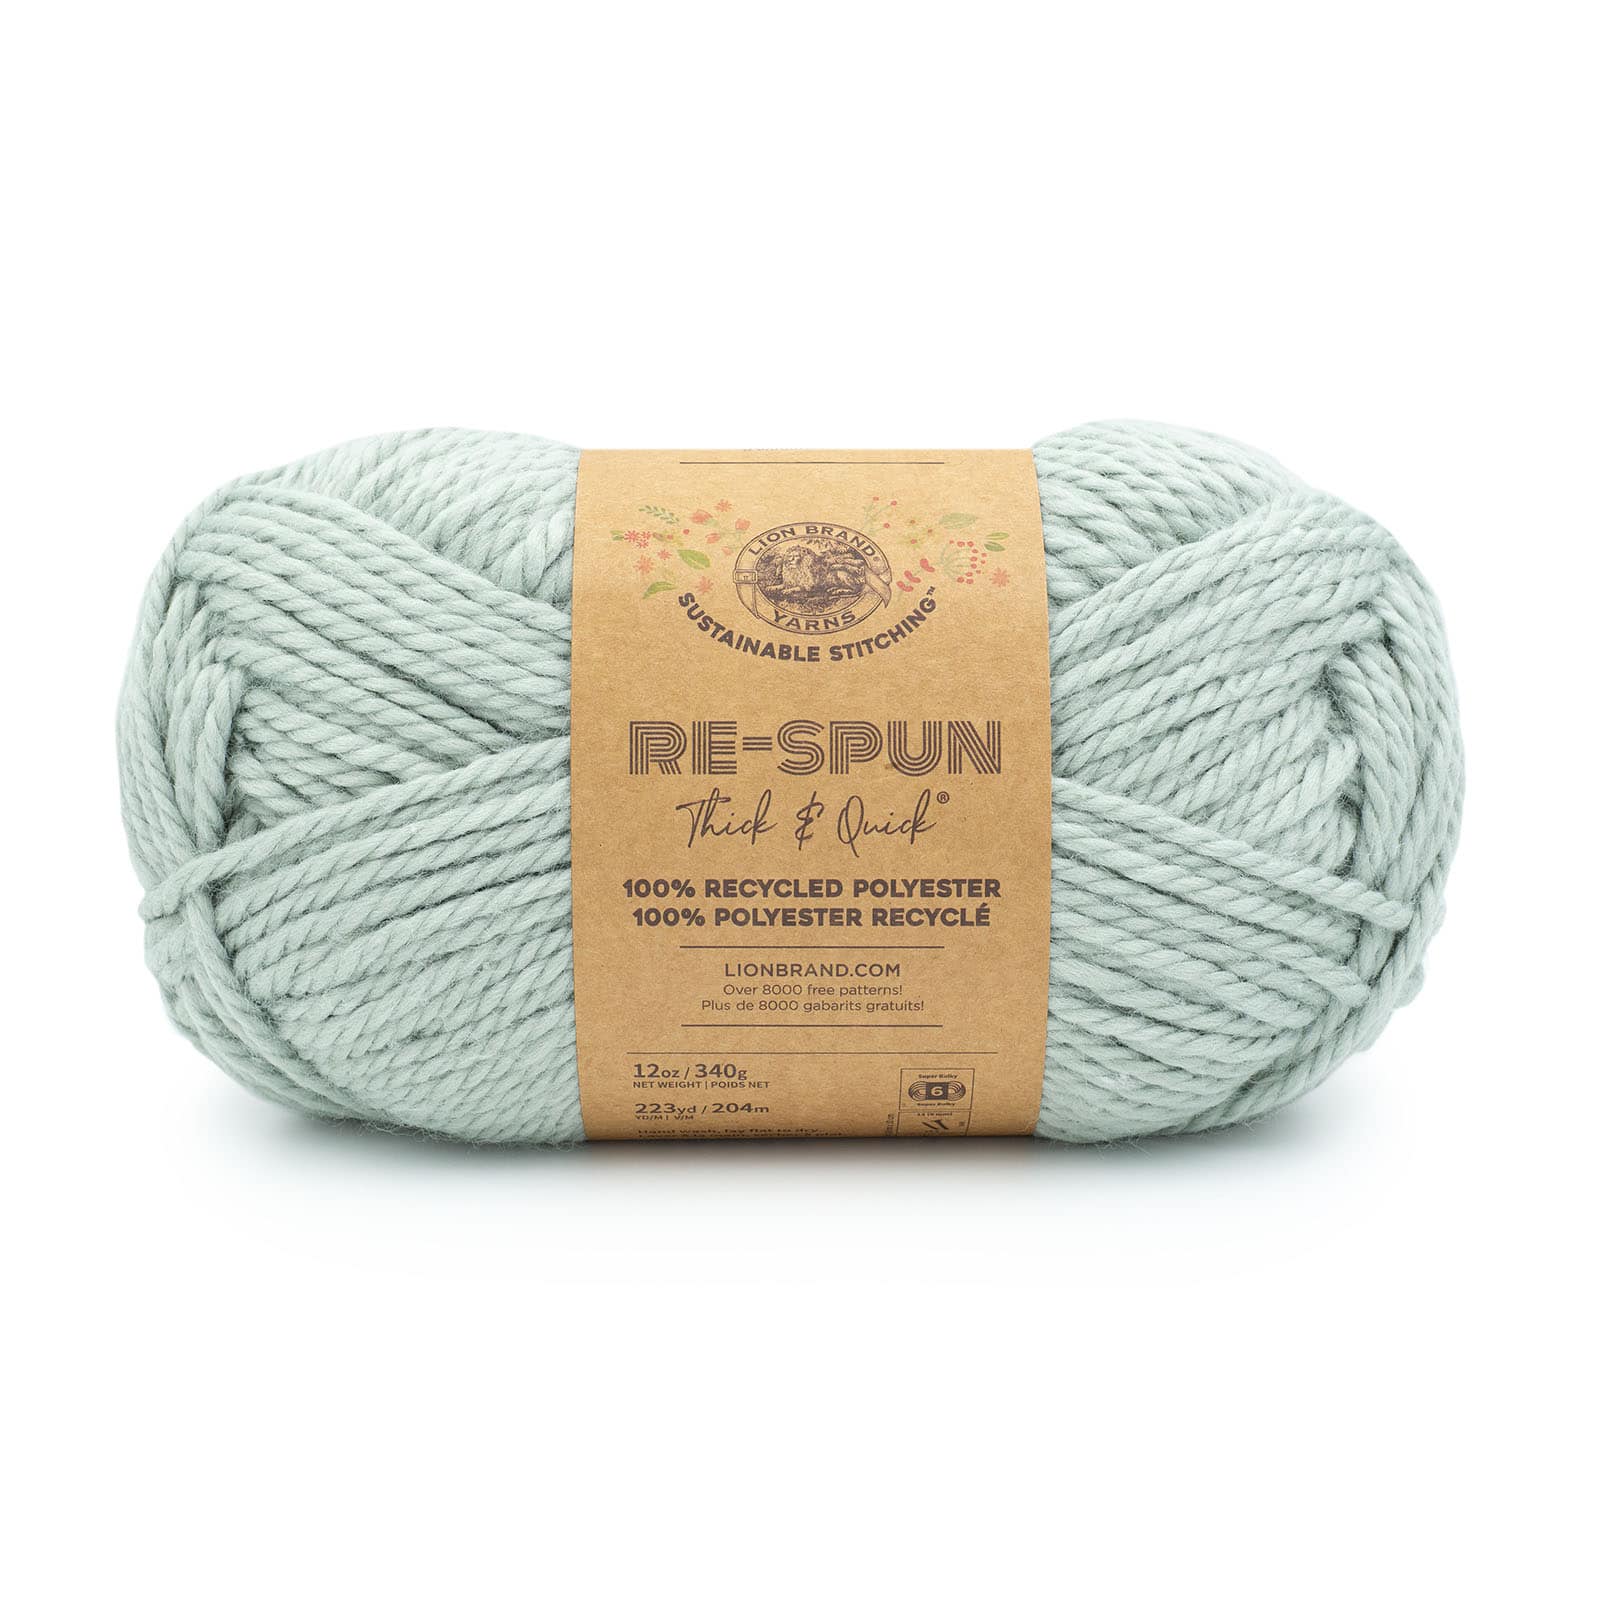 Lion Brand Yarn - Have you seen the Deal of the Day? For